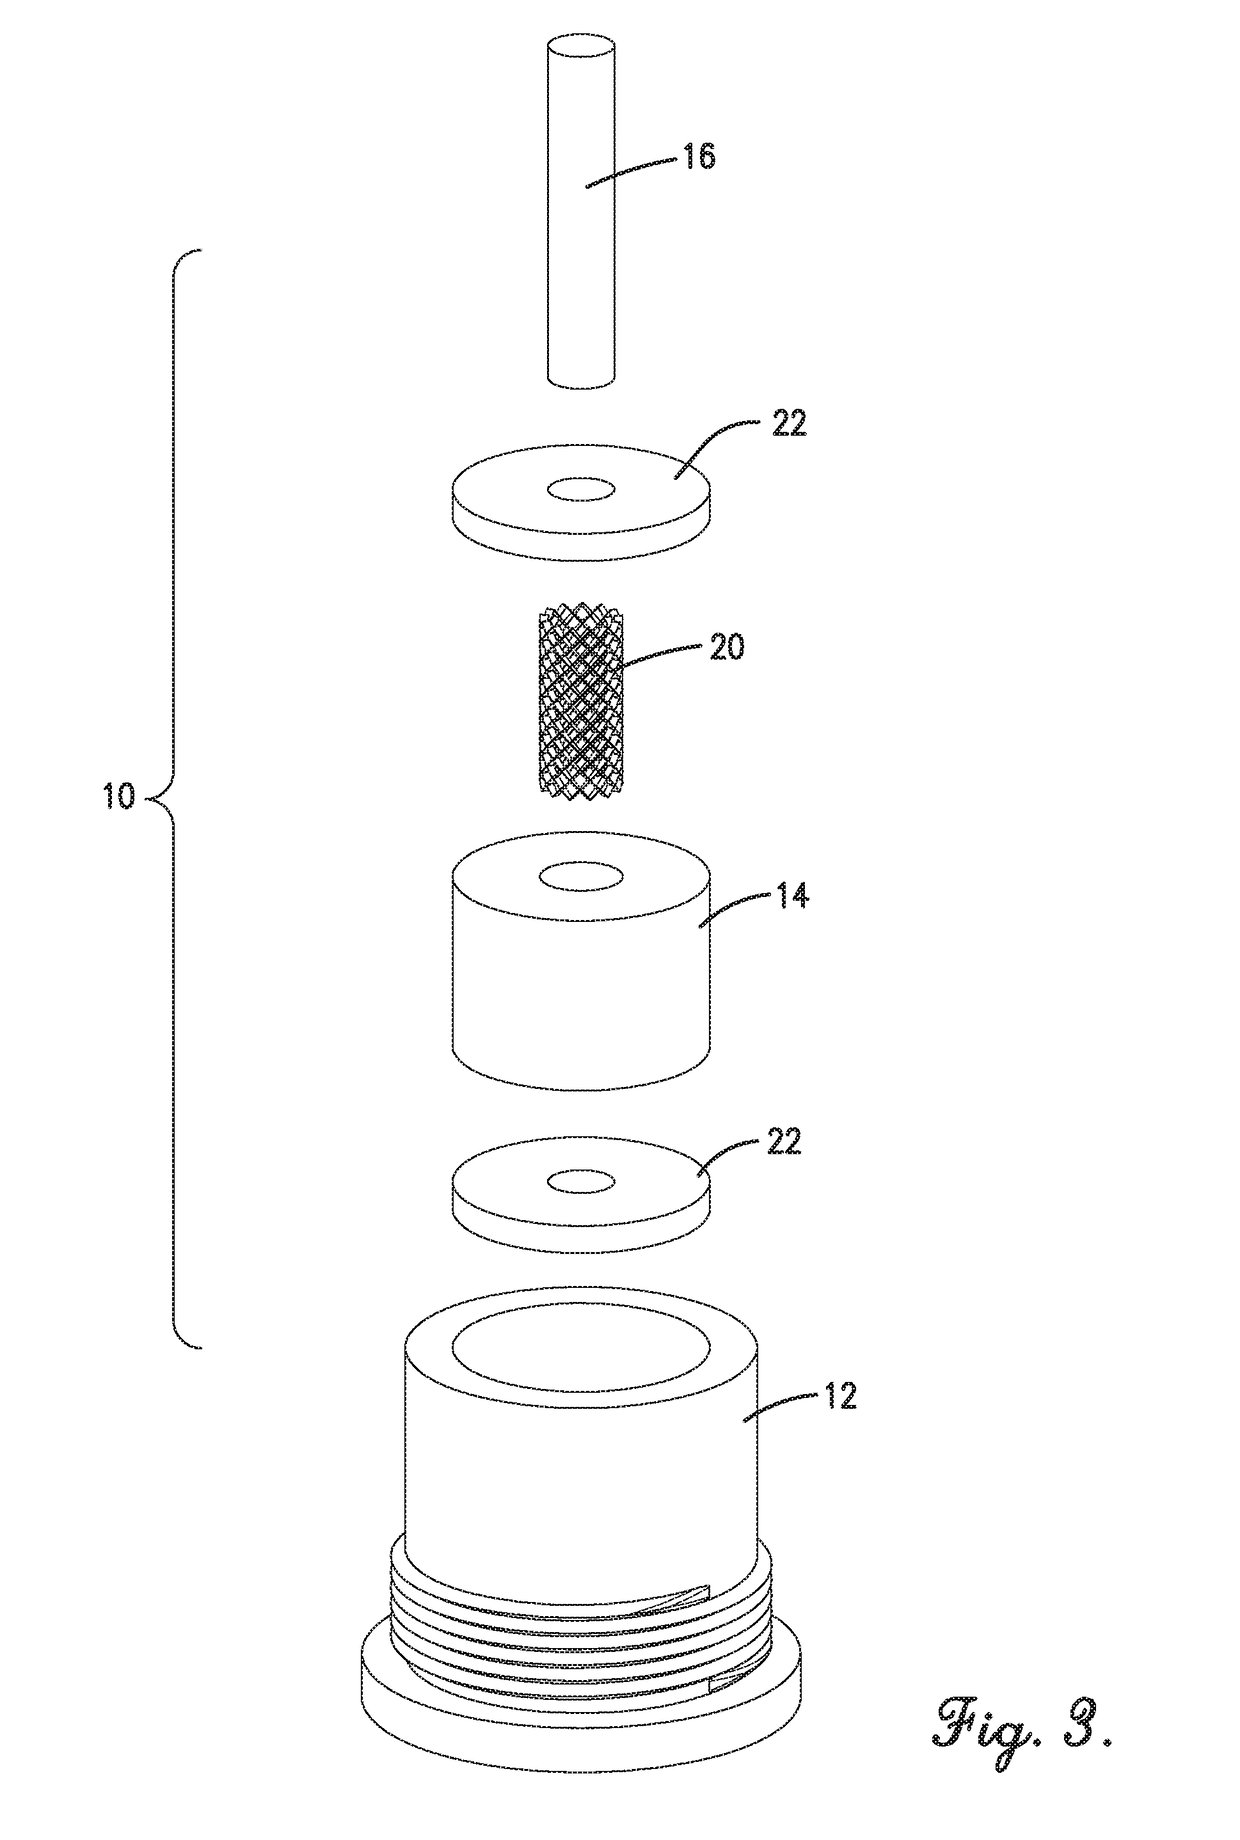 Lightning arrestor connector with mesh dielectric structure